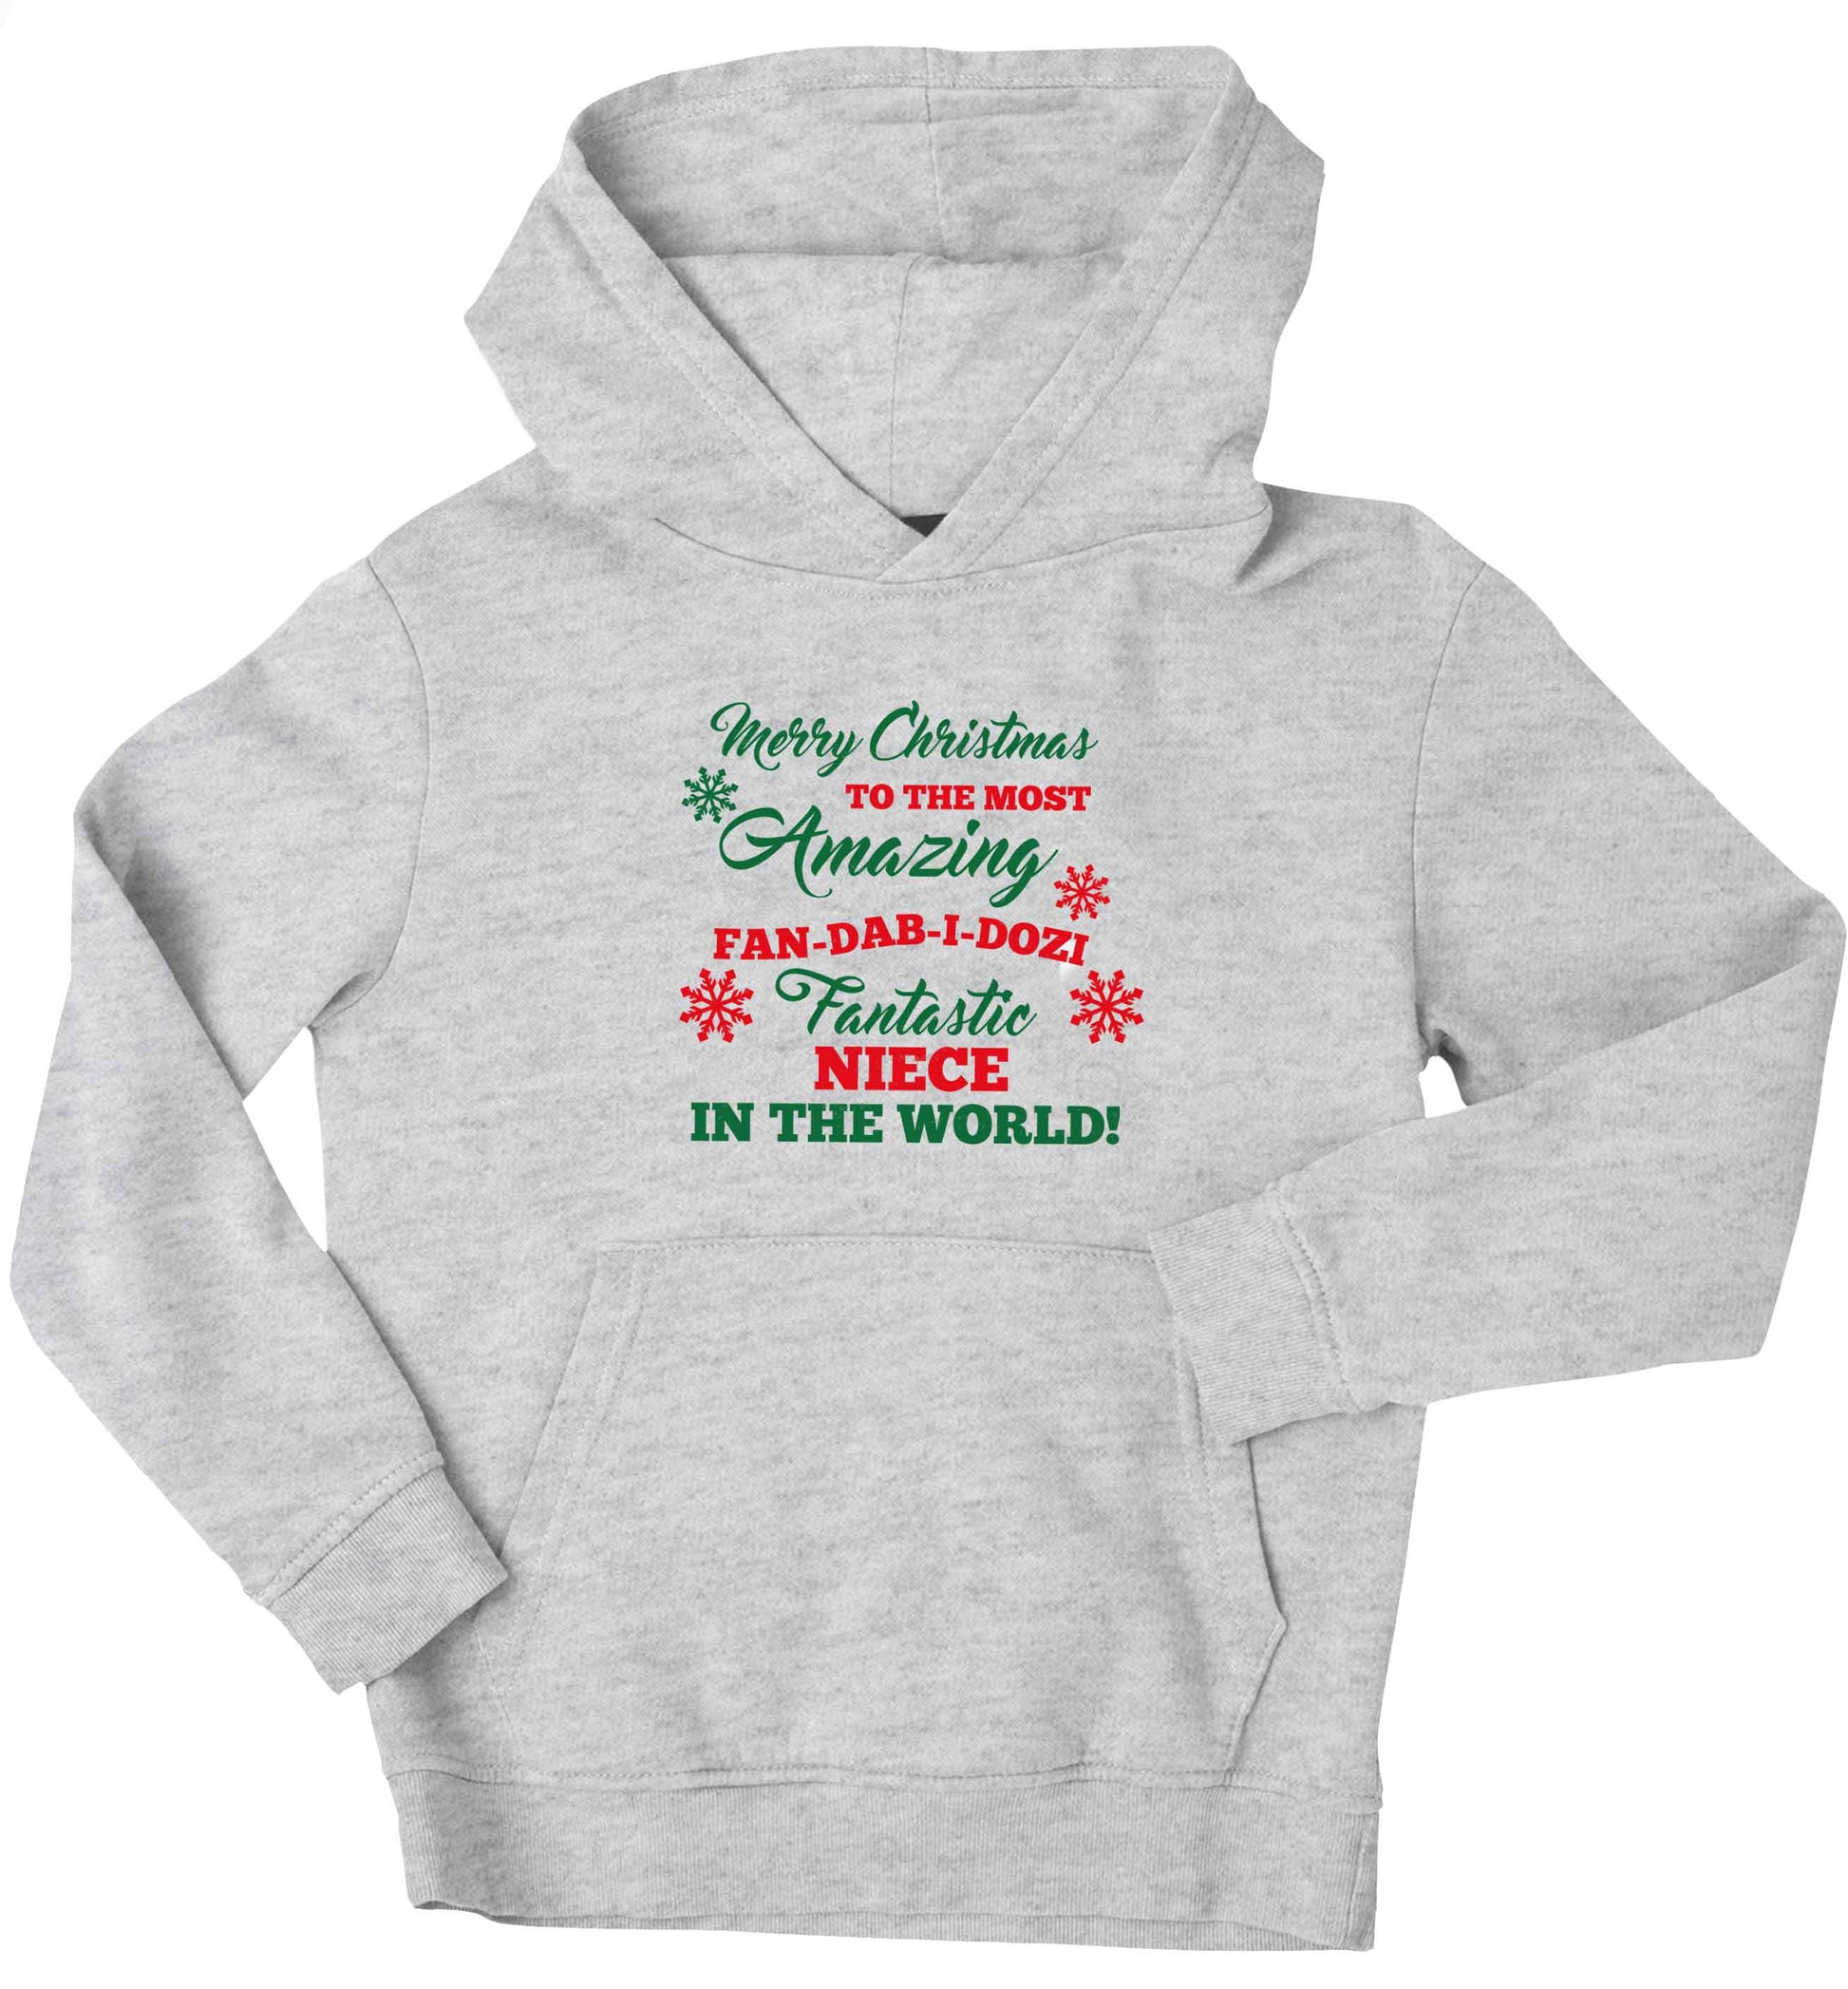 Merry Christmas to the most amazing fan-dab-i-dozi fantasic Niece in the world children's grey hoodie 12-13 Years